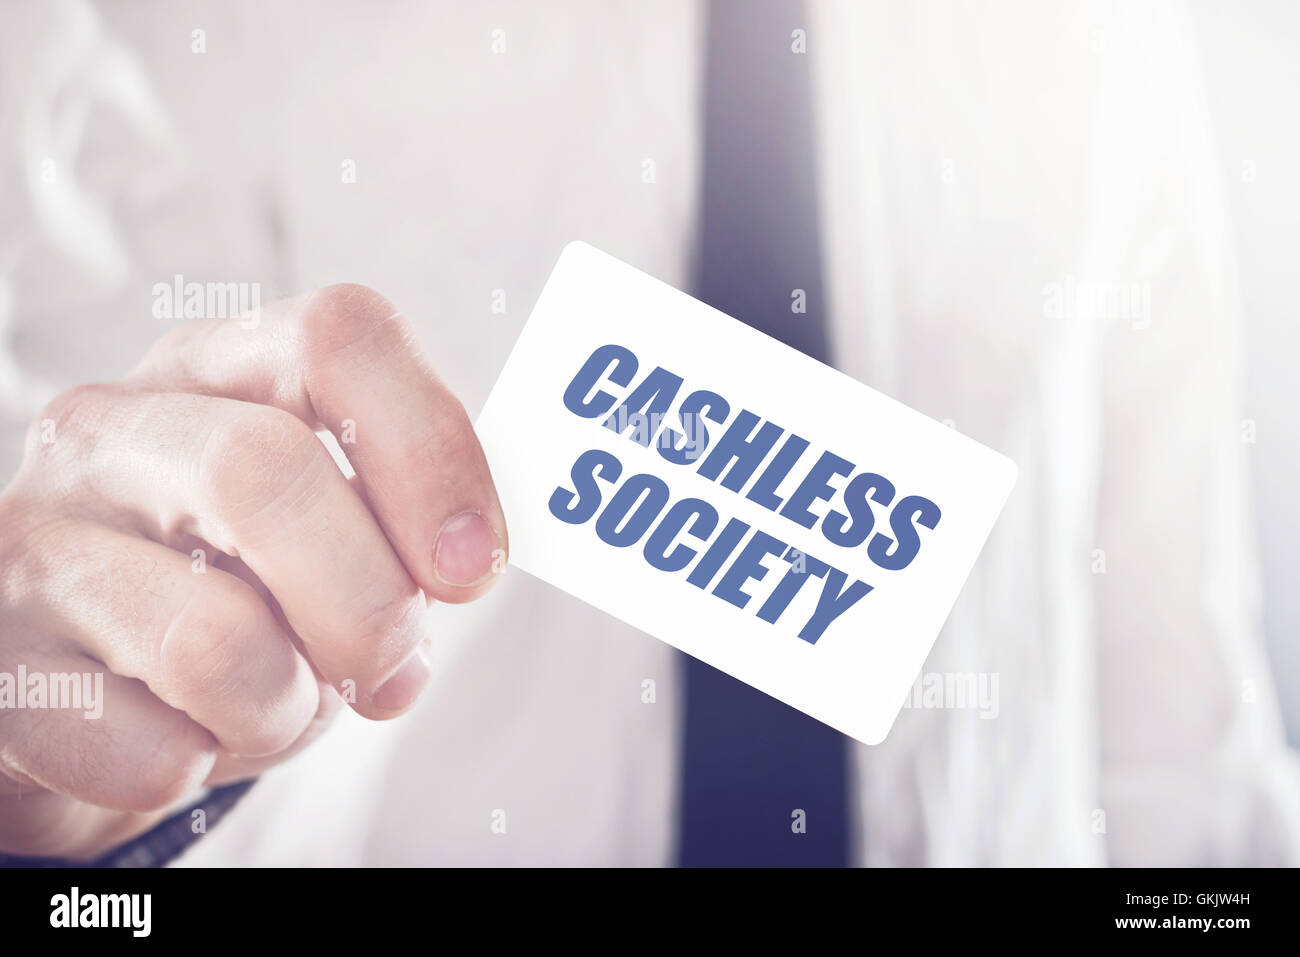 Businessman holding card with Cashless society title, concept of promoting mobile and electronic payments without cash money ban Stock Photo